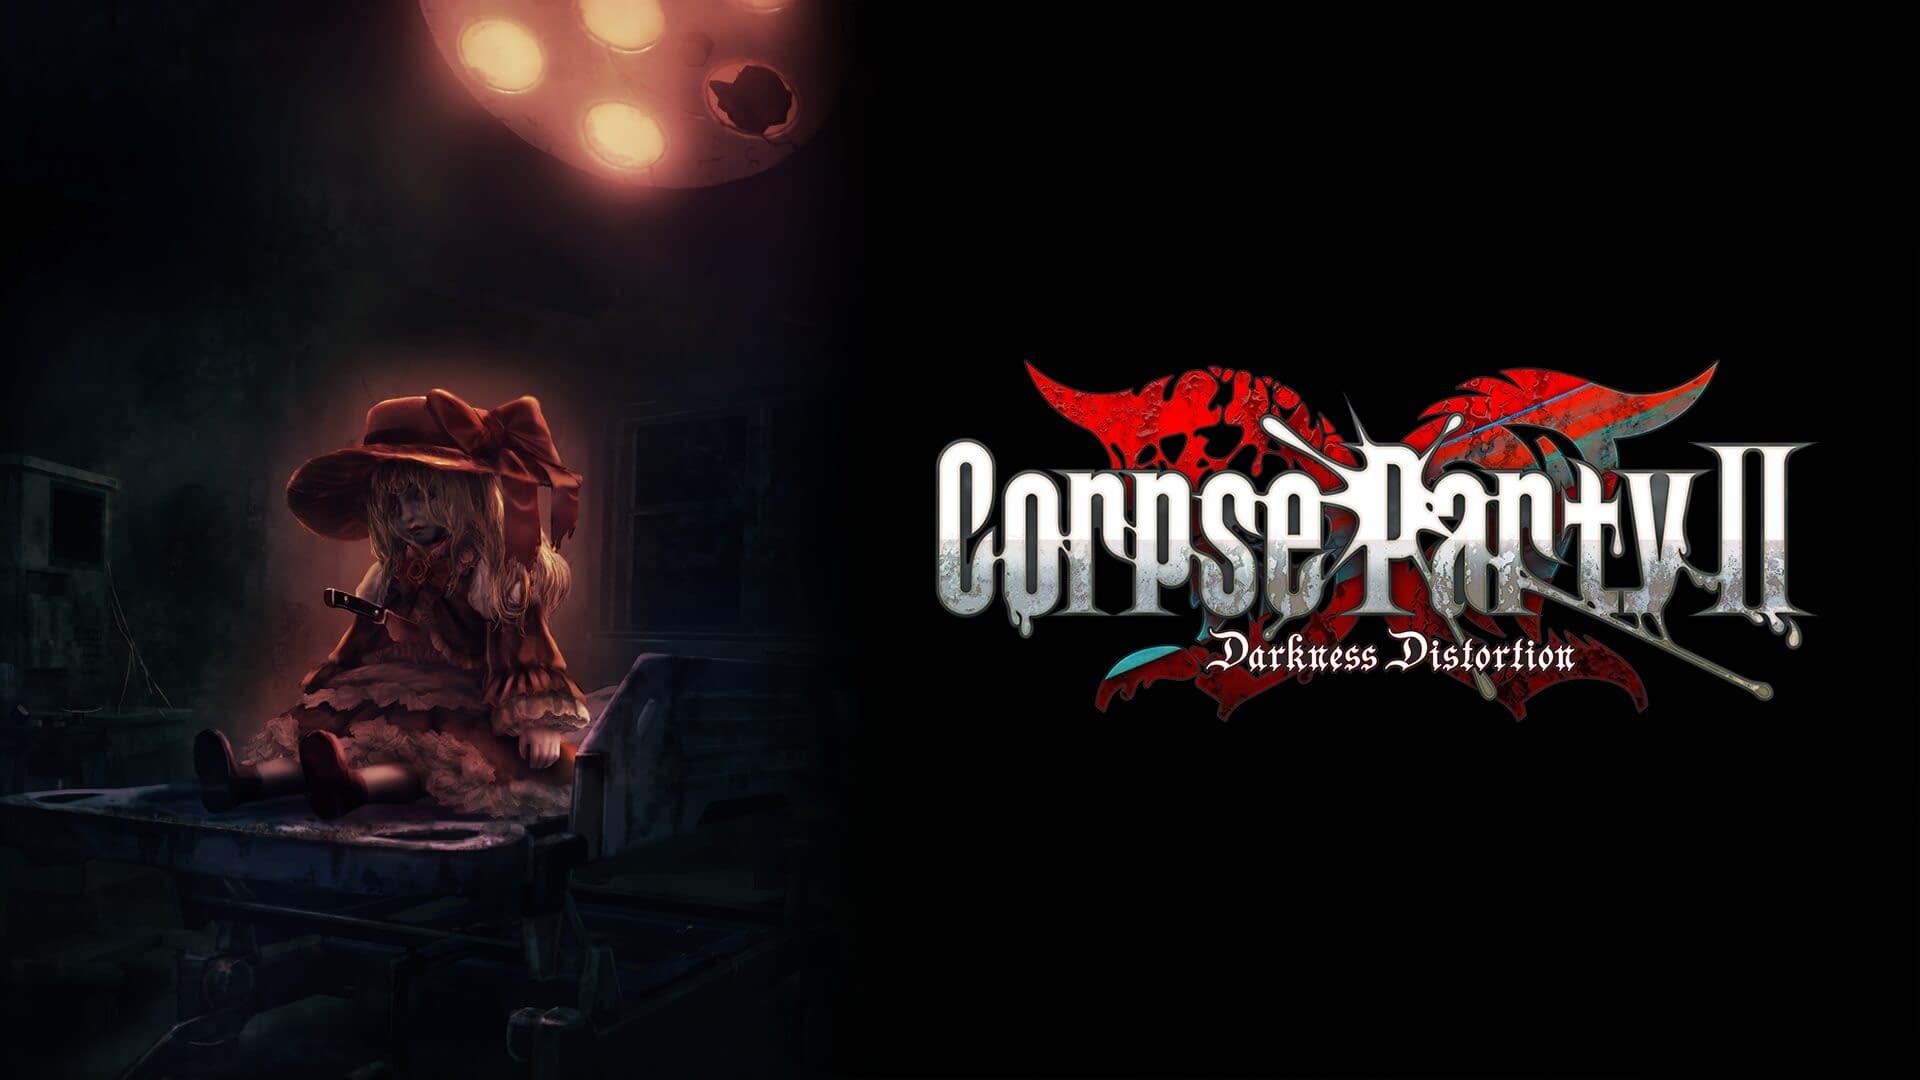 Corpse Party II: First Fragman Published For Darkness Distortion